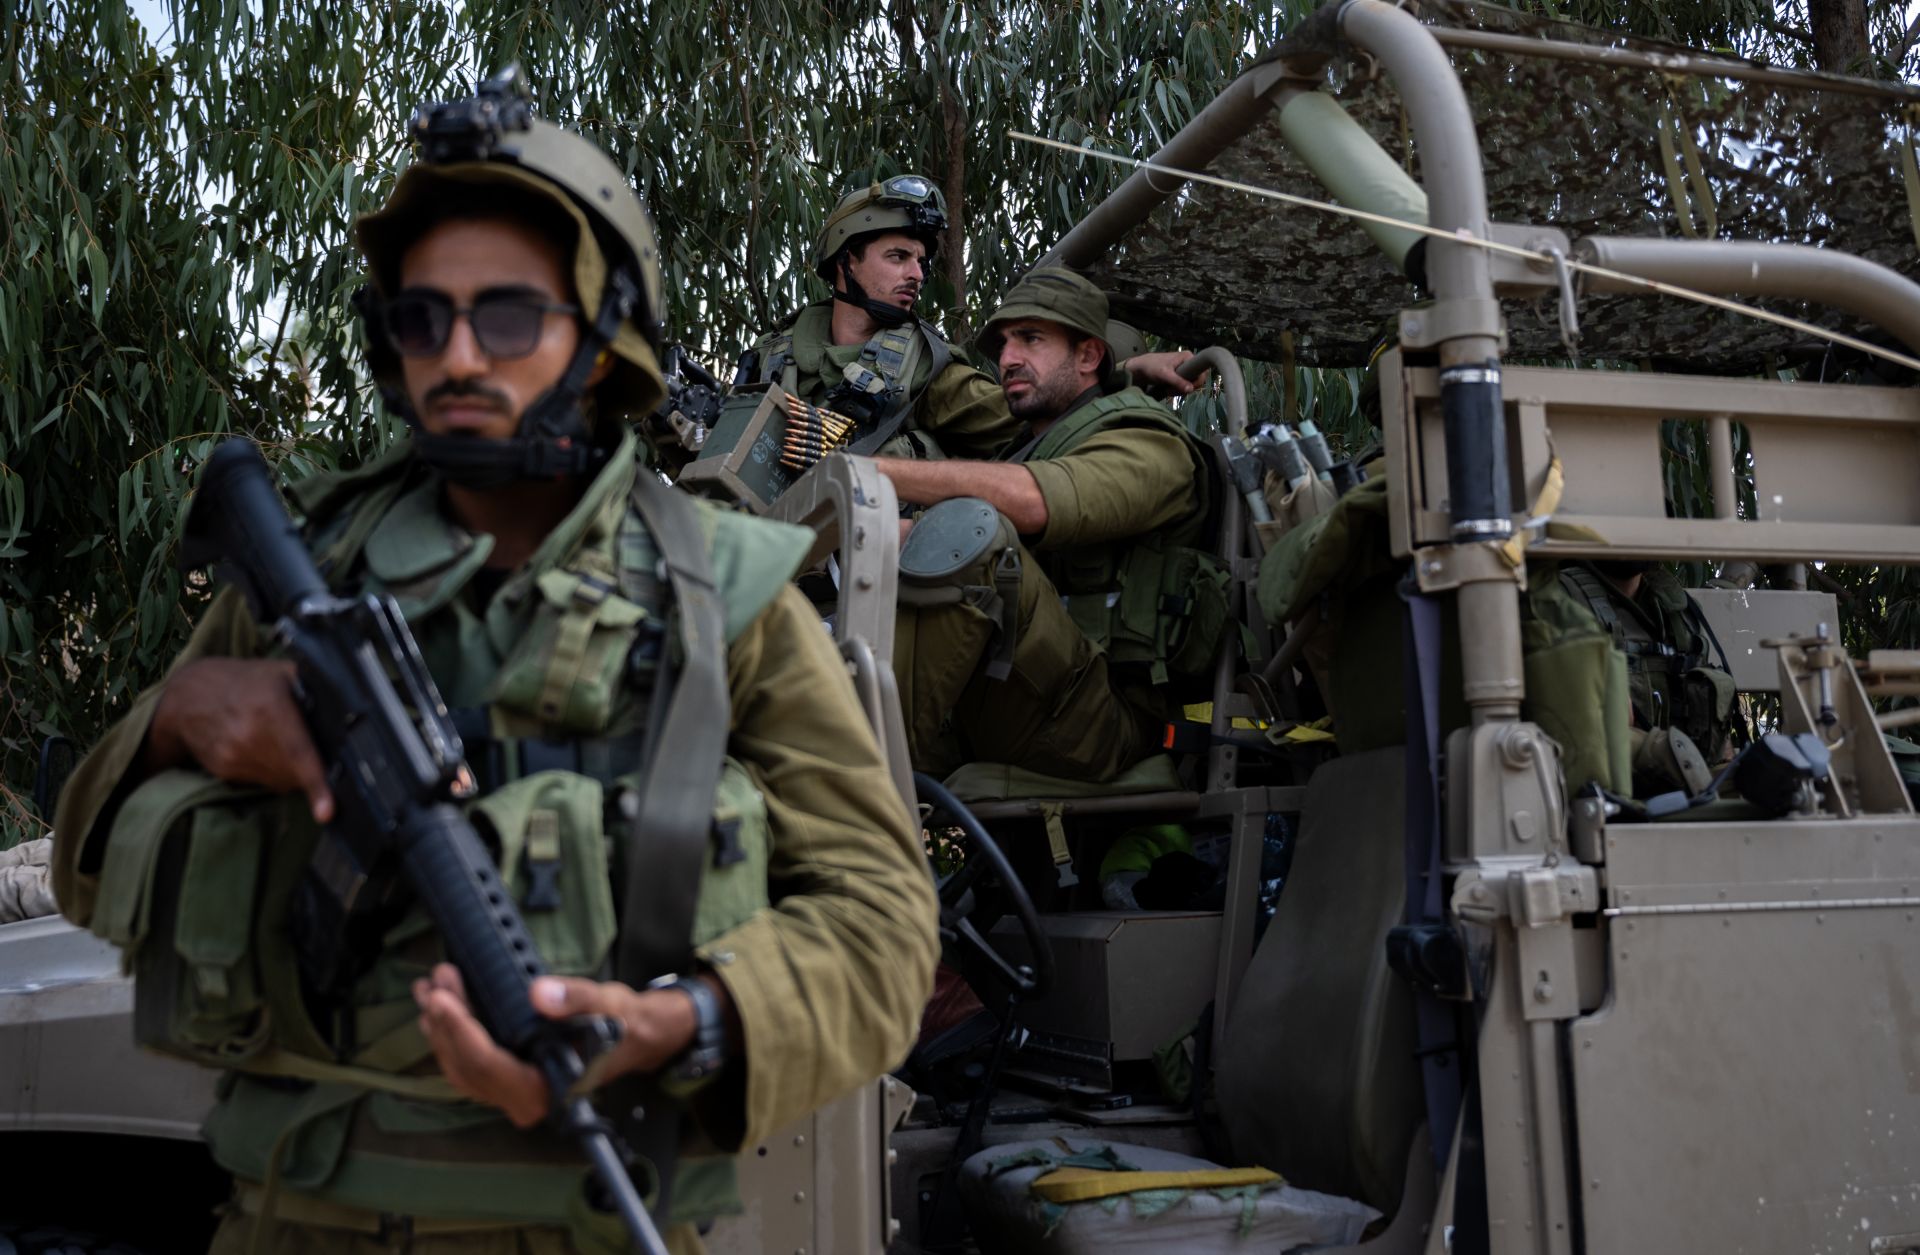 Israel Defense Forces soldiers guard an area around the Israeli settlement Kfar Azza on Oct. 10, 2023, after Hamas militants killed dozens of civilians there days earlier.